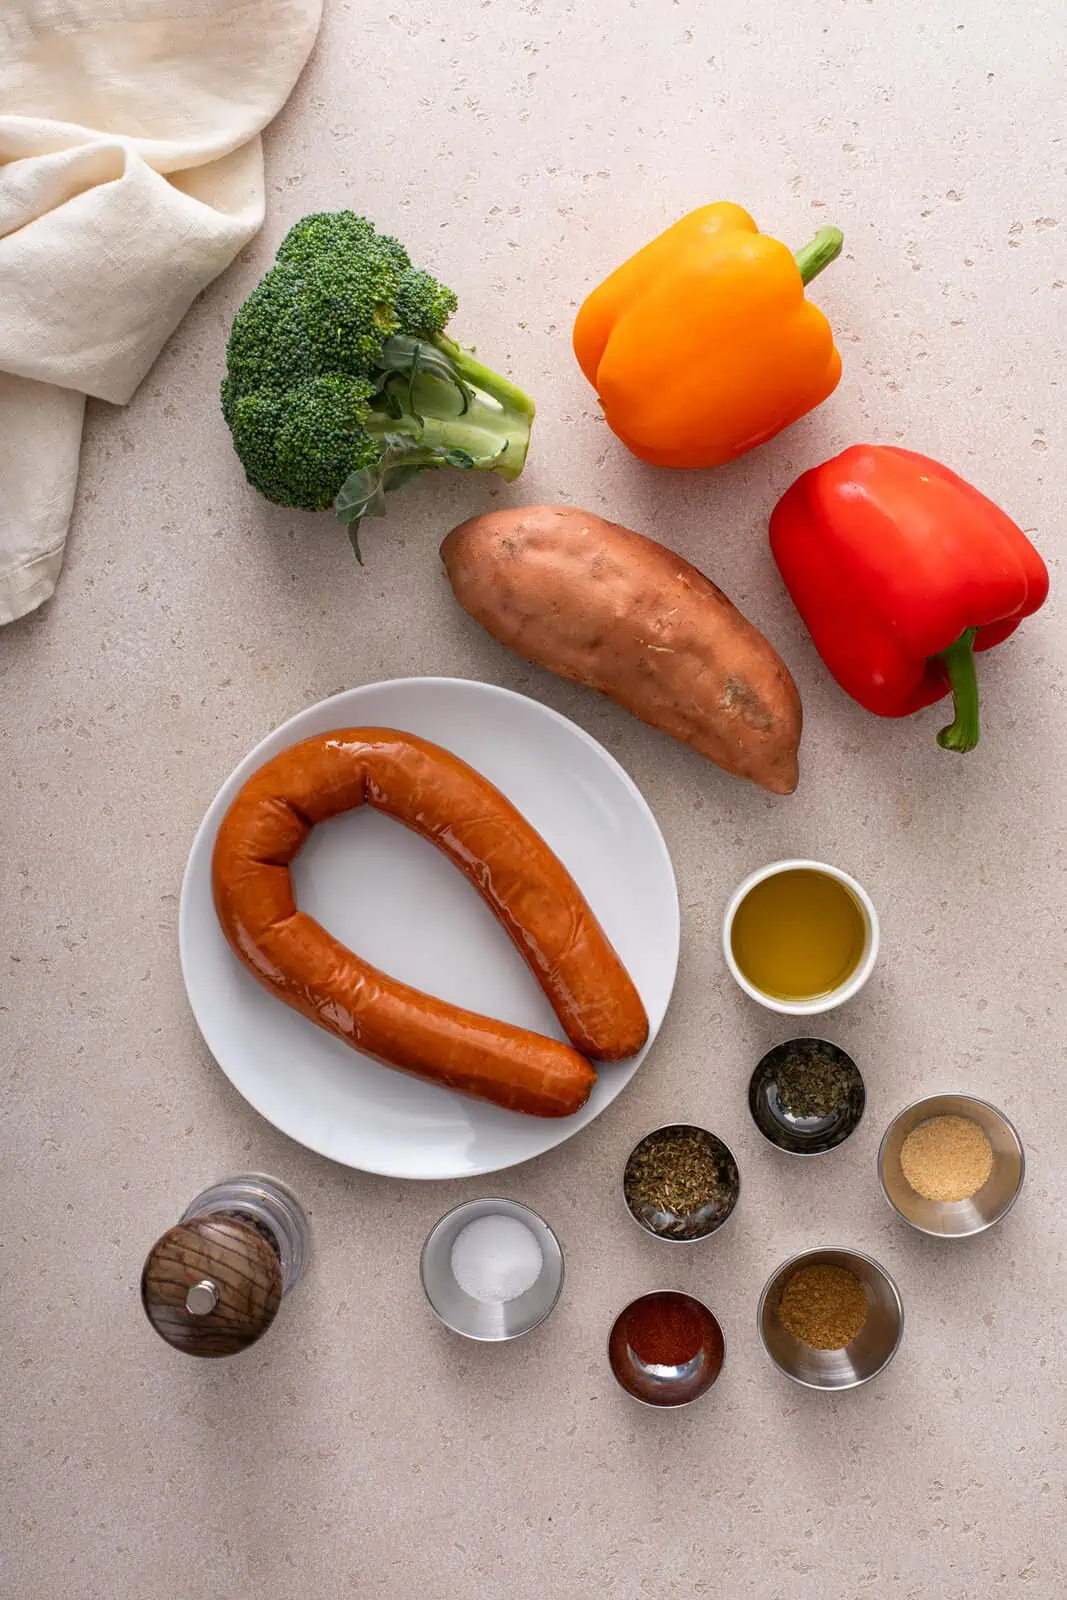 Ingredients for sheet pan sausage and veggies arranged on a beige countertop.